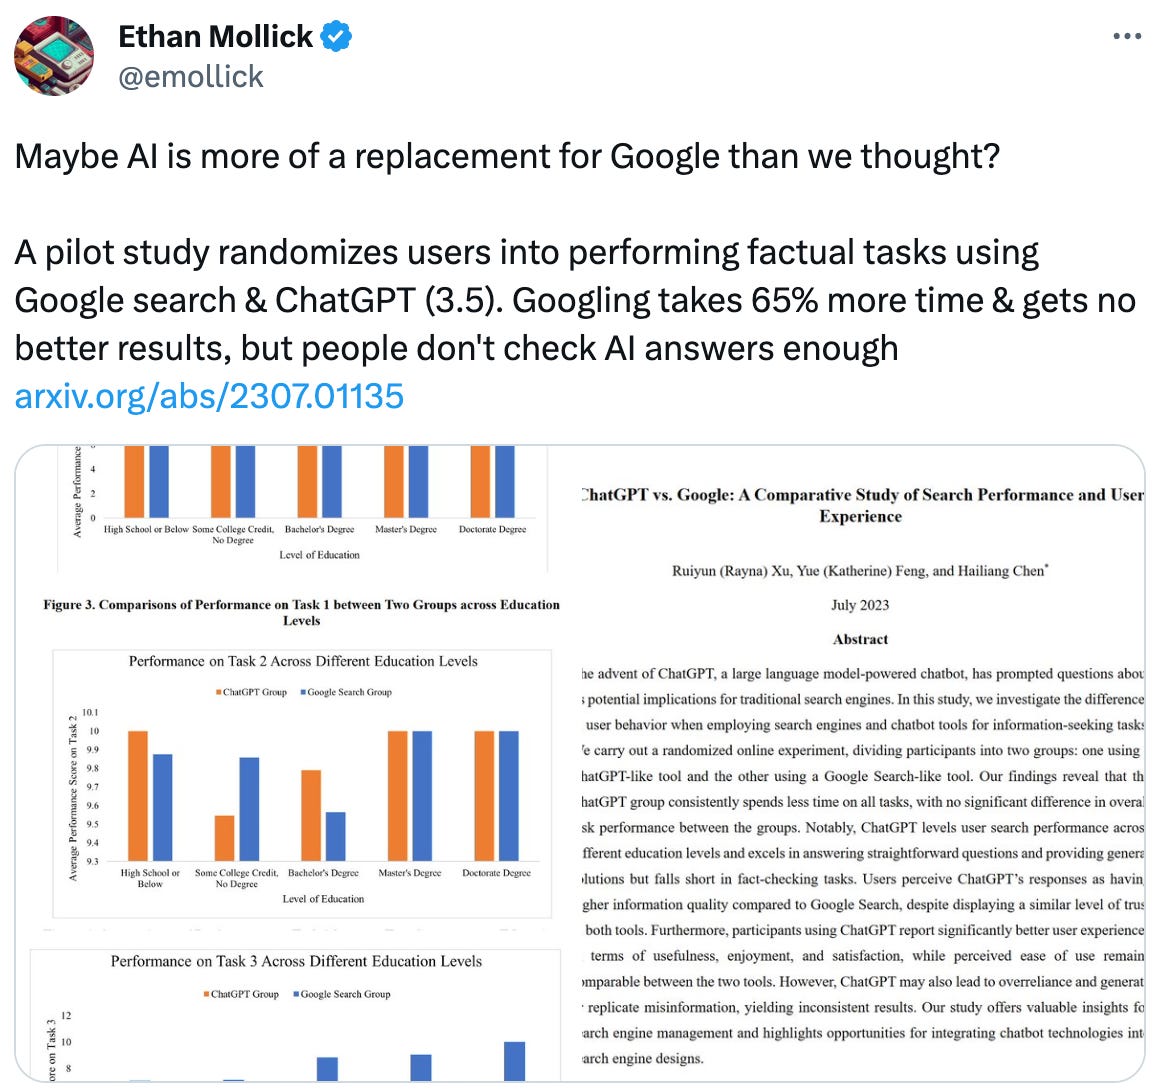  Ethan Mollick @emollick Maybe AI is more of a replacement for Google than we thought?  A pilot study randomizes users into performing factual tasks using Google search & ChatGPT (3.5). Googling takes 65% more time & gets no better results, but people don't check AI answers enough https://arxiv.org/abs/2307.01135